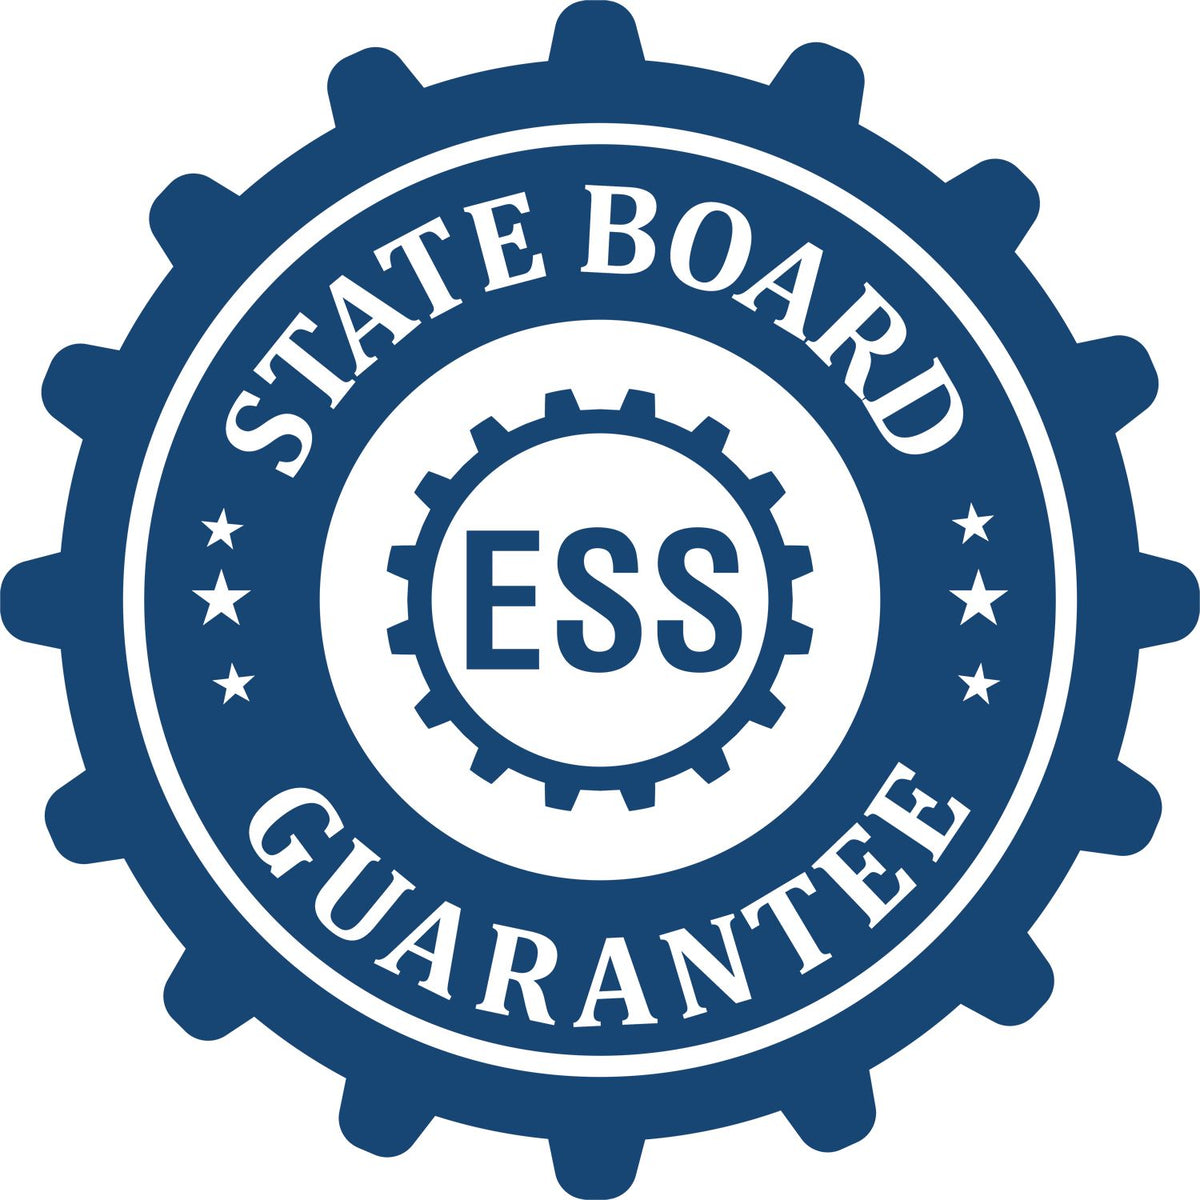 An emblem in a gear shape illustrating a state board guarantee for the Louisiana Geologist Desk Seal